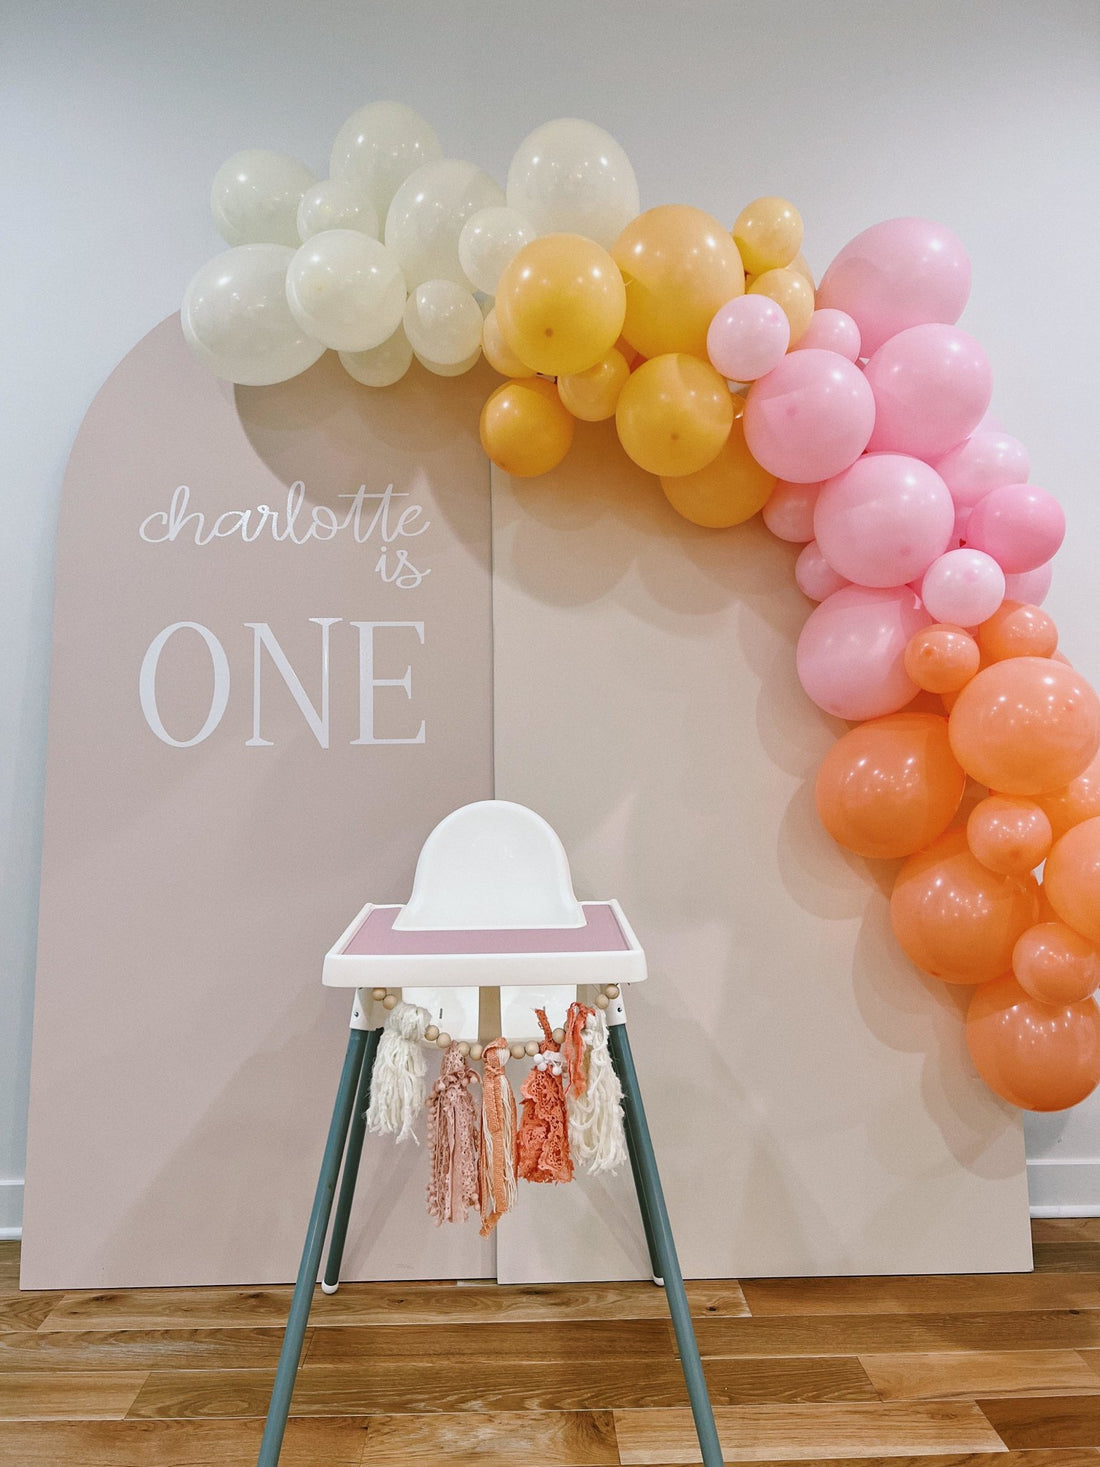 Top 5 First Birthday Party Themes - Ellie's Party Supply